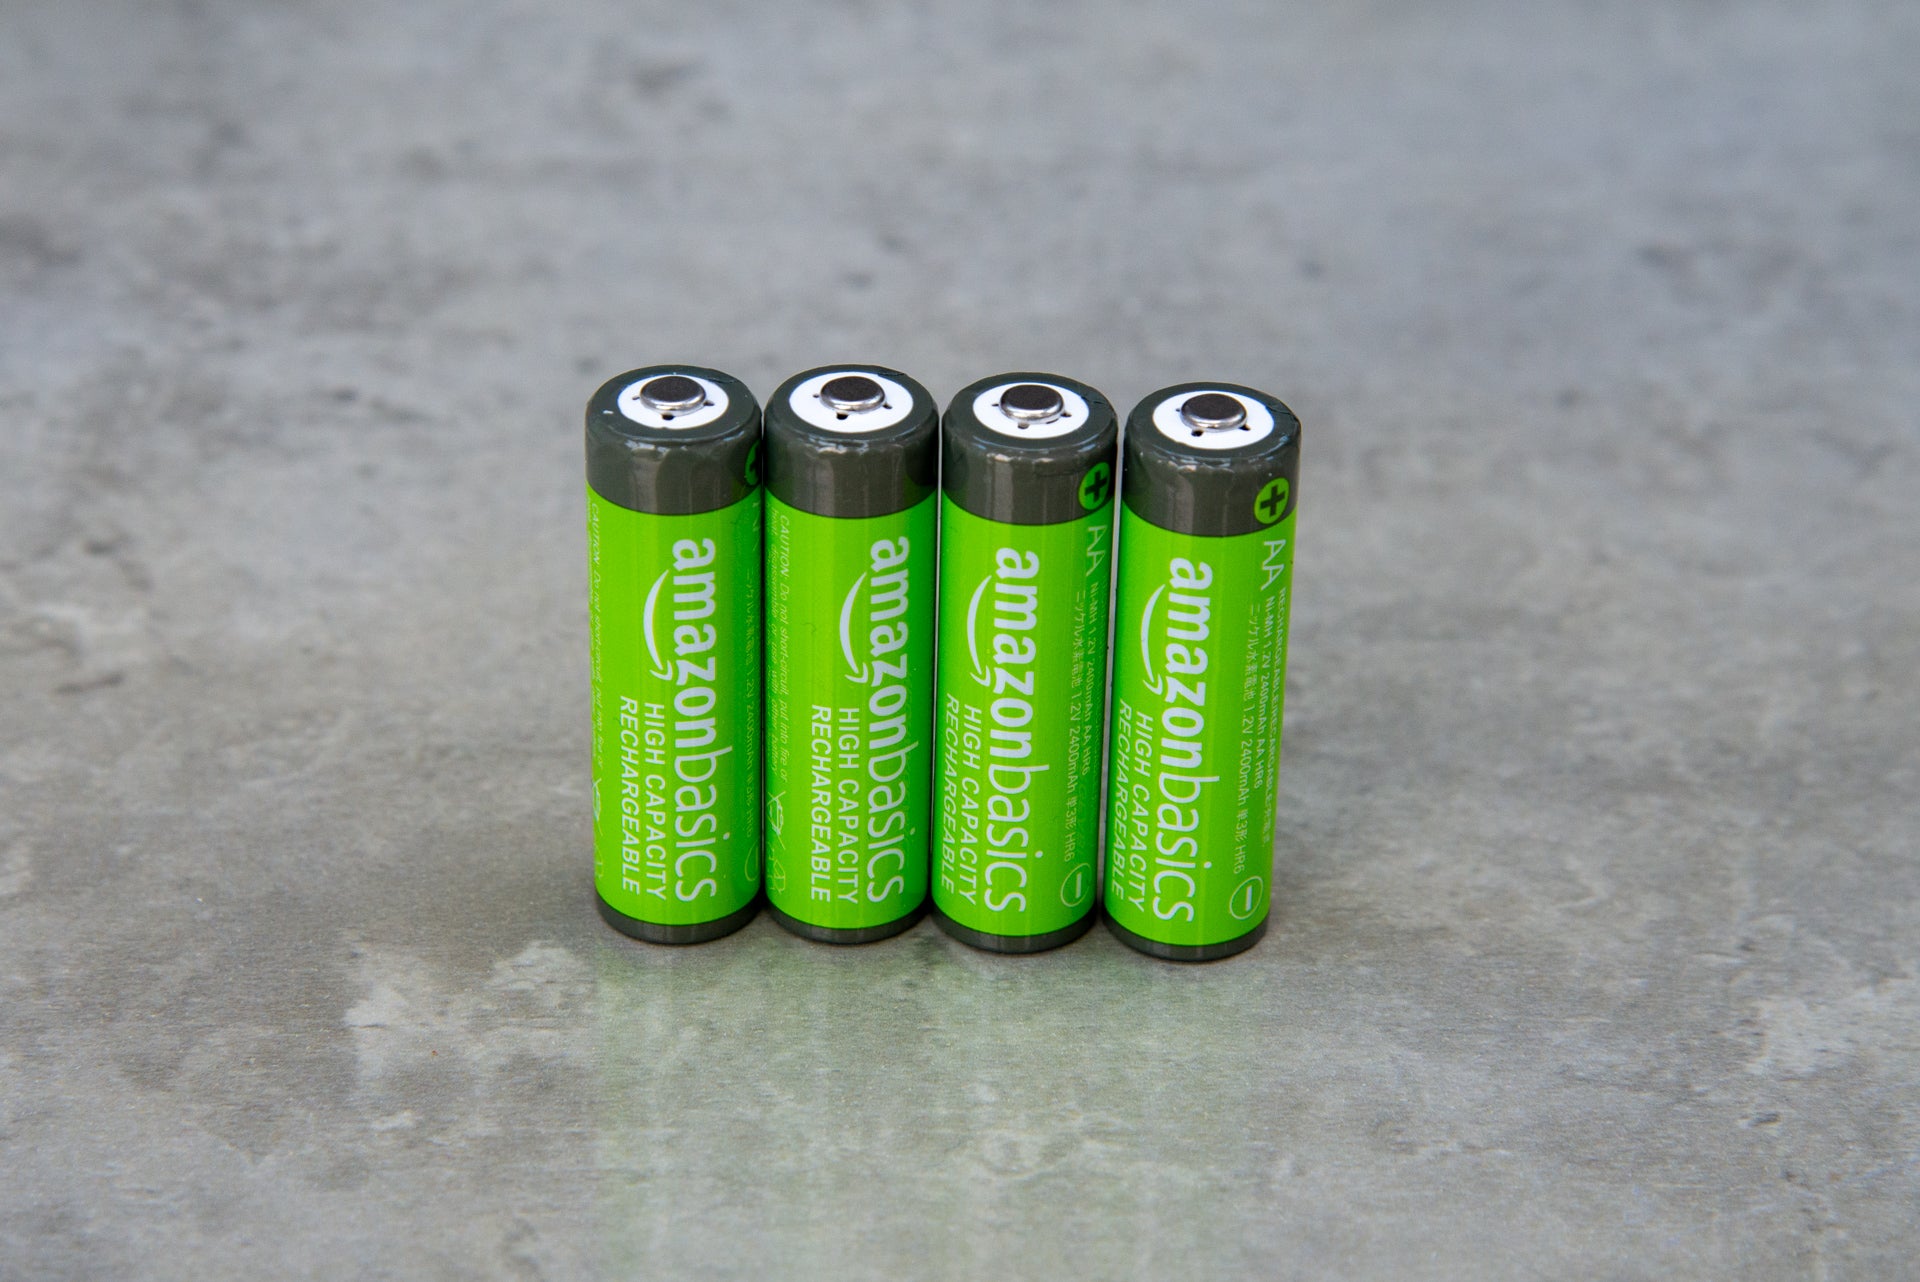 Basics High Capacity Rechargeable AA 2400mAh review: Great